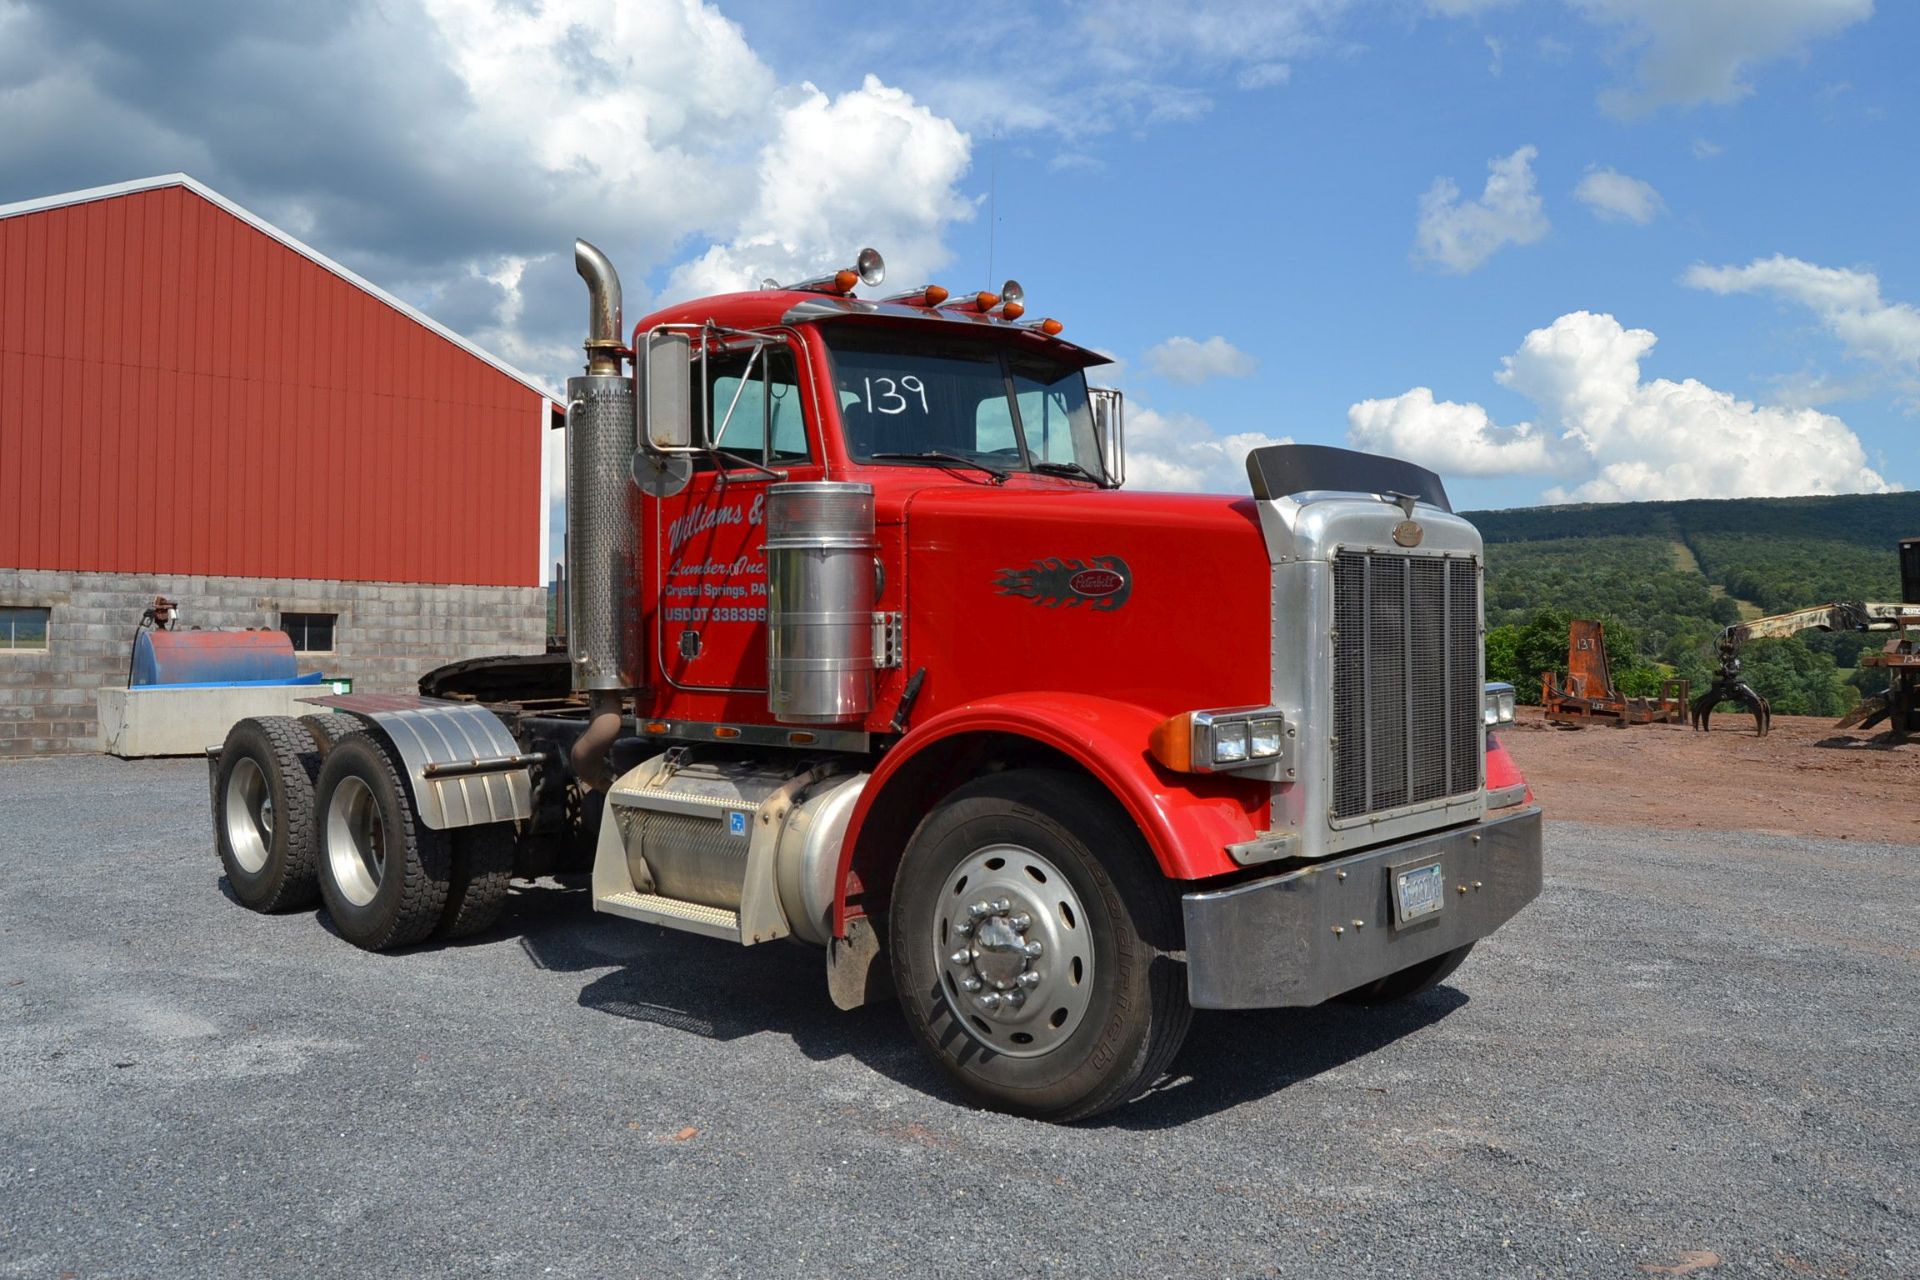 1999 PETERBILT 378 DAY CAB ROAD TRACTOR W/ 60 SERIES DETROIT ENGINE 500 HP W/ 10 SPEED TRANS W/ ALUM - Image 2 of 4